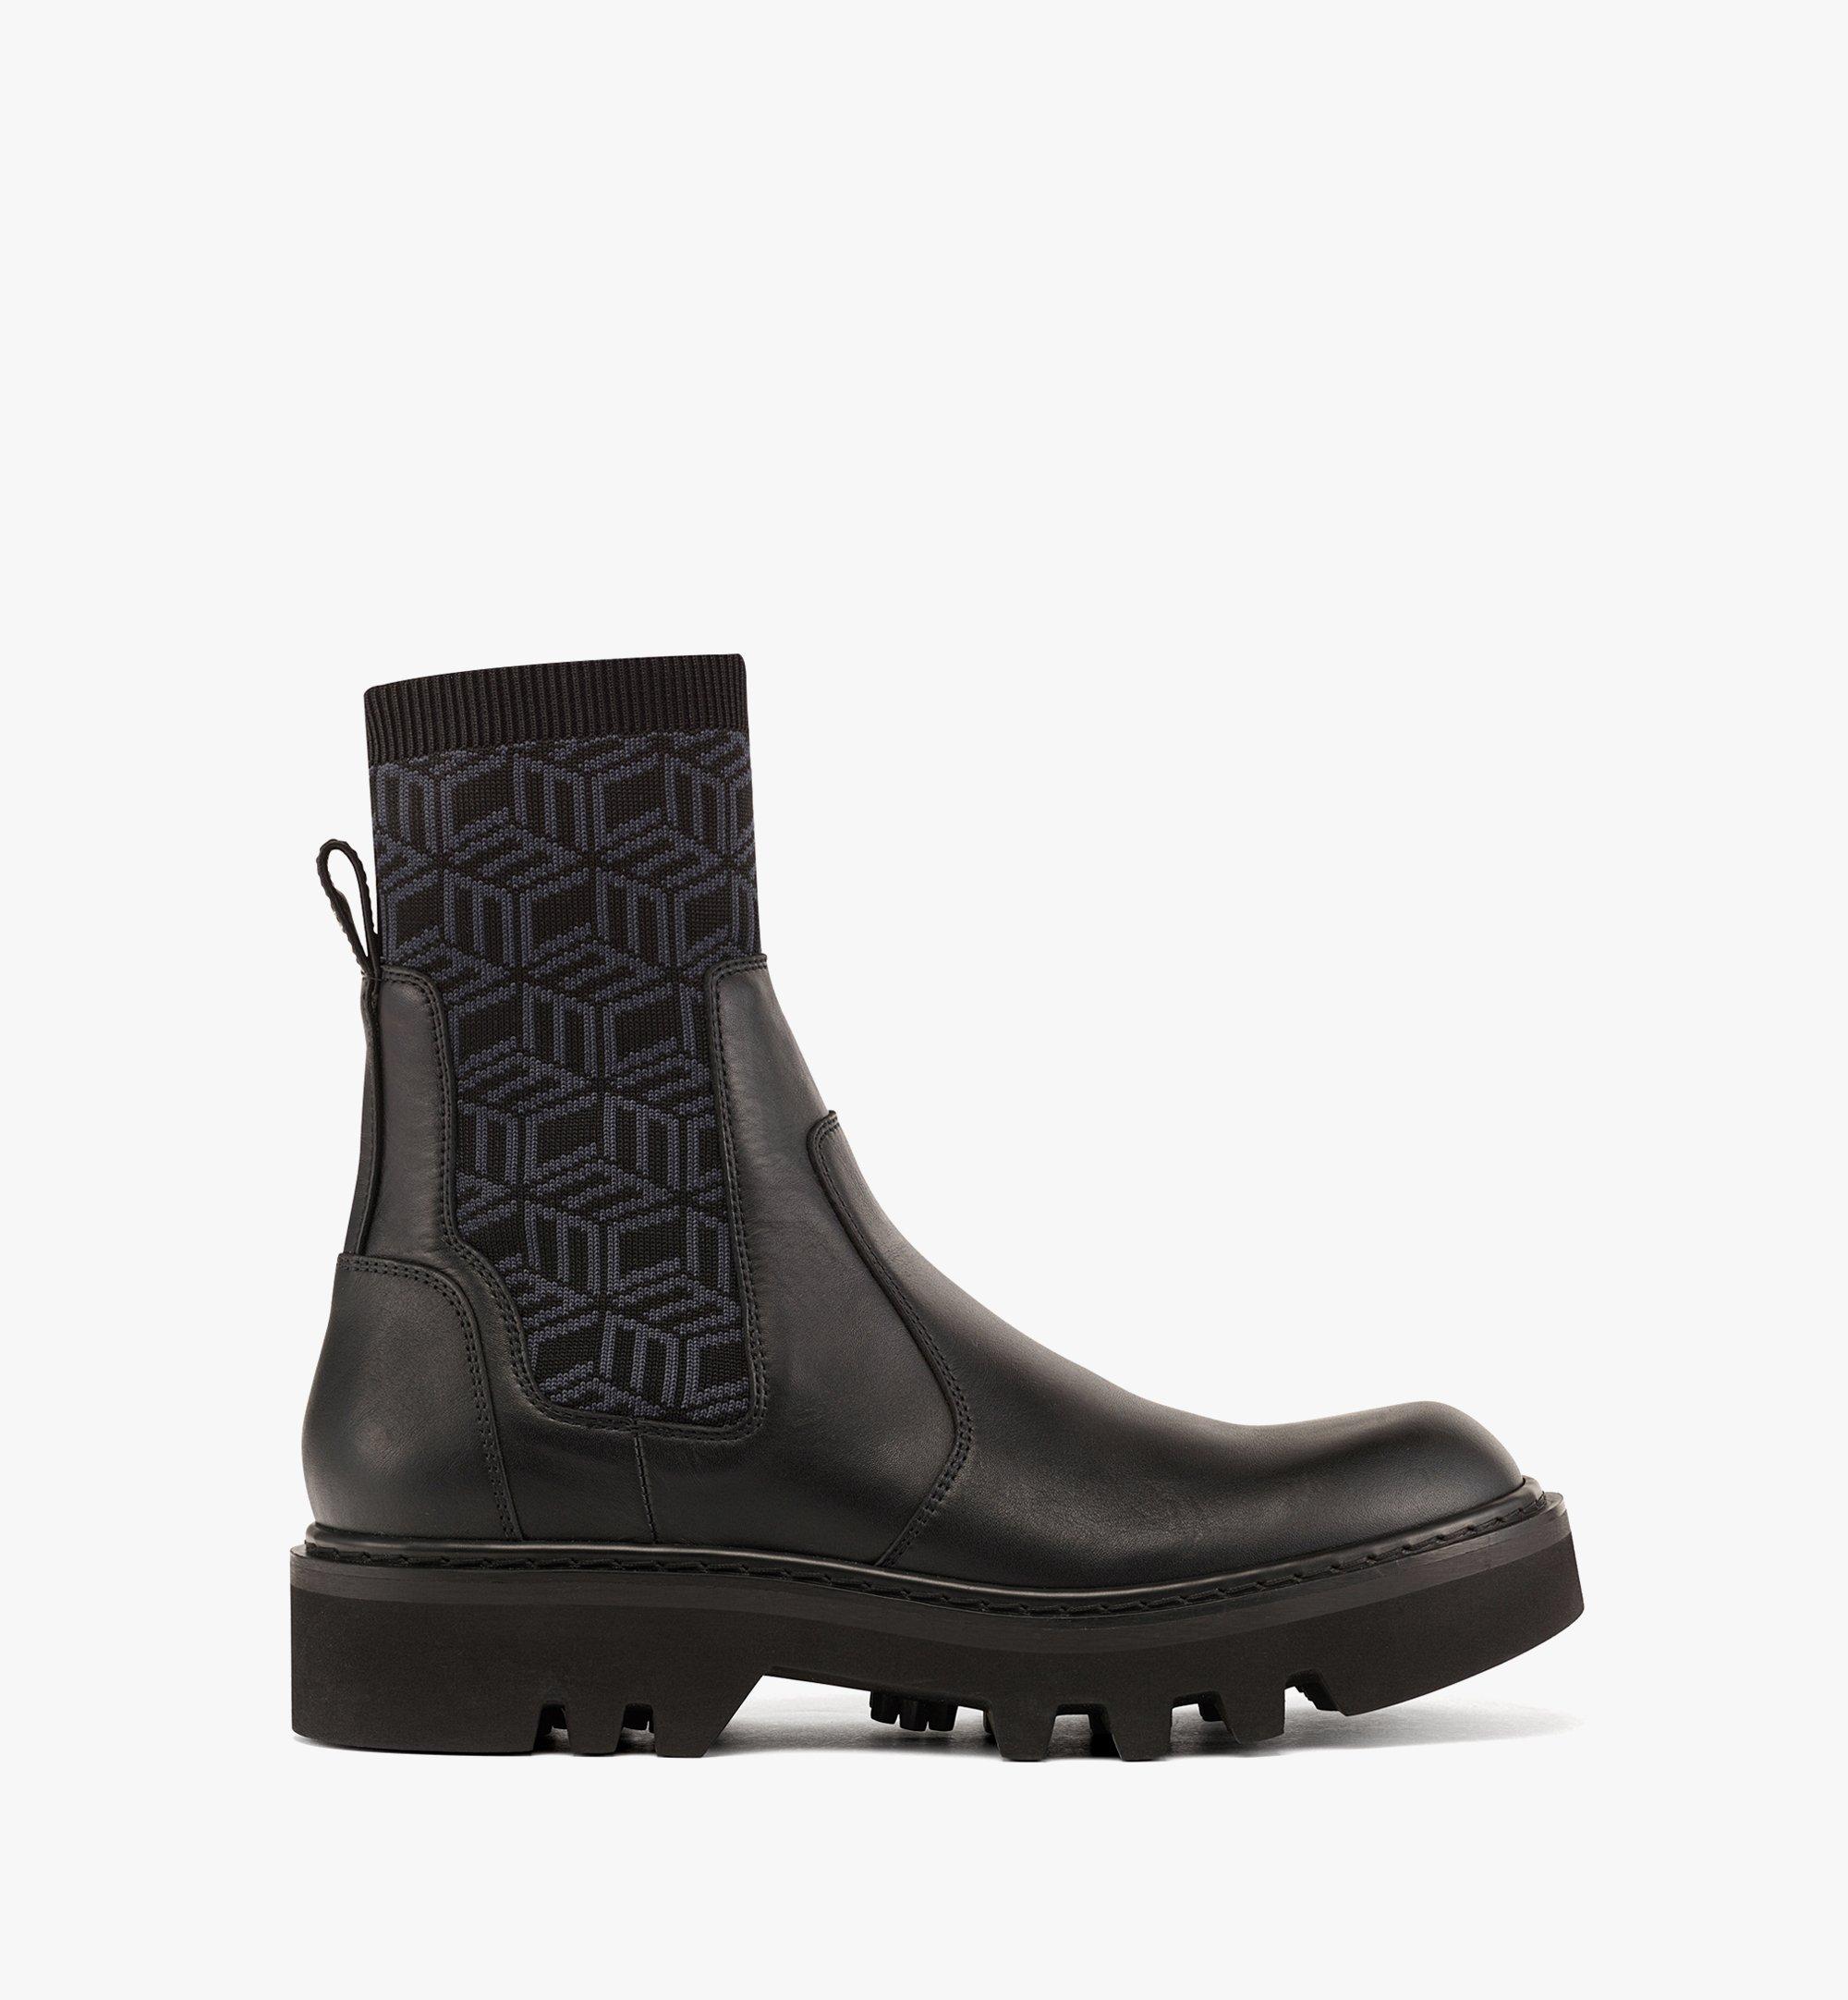 42 IT Cubic Knit Boots in Calf Leather Black | MCM ®JP